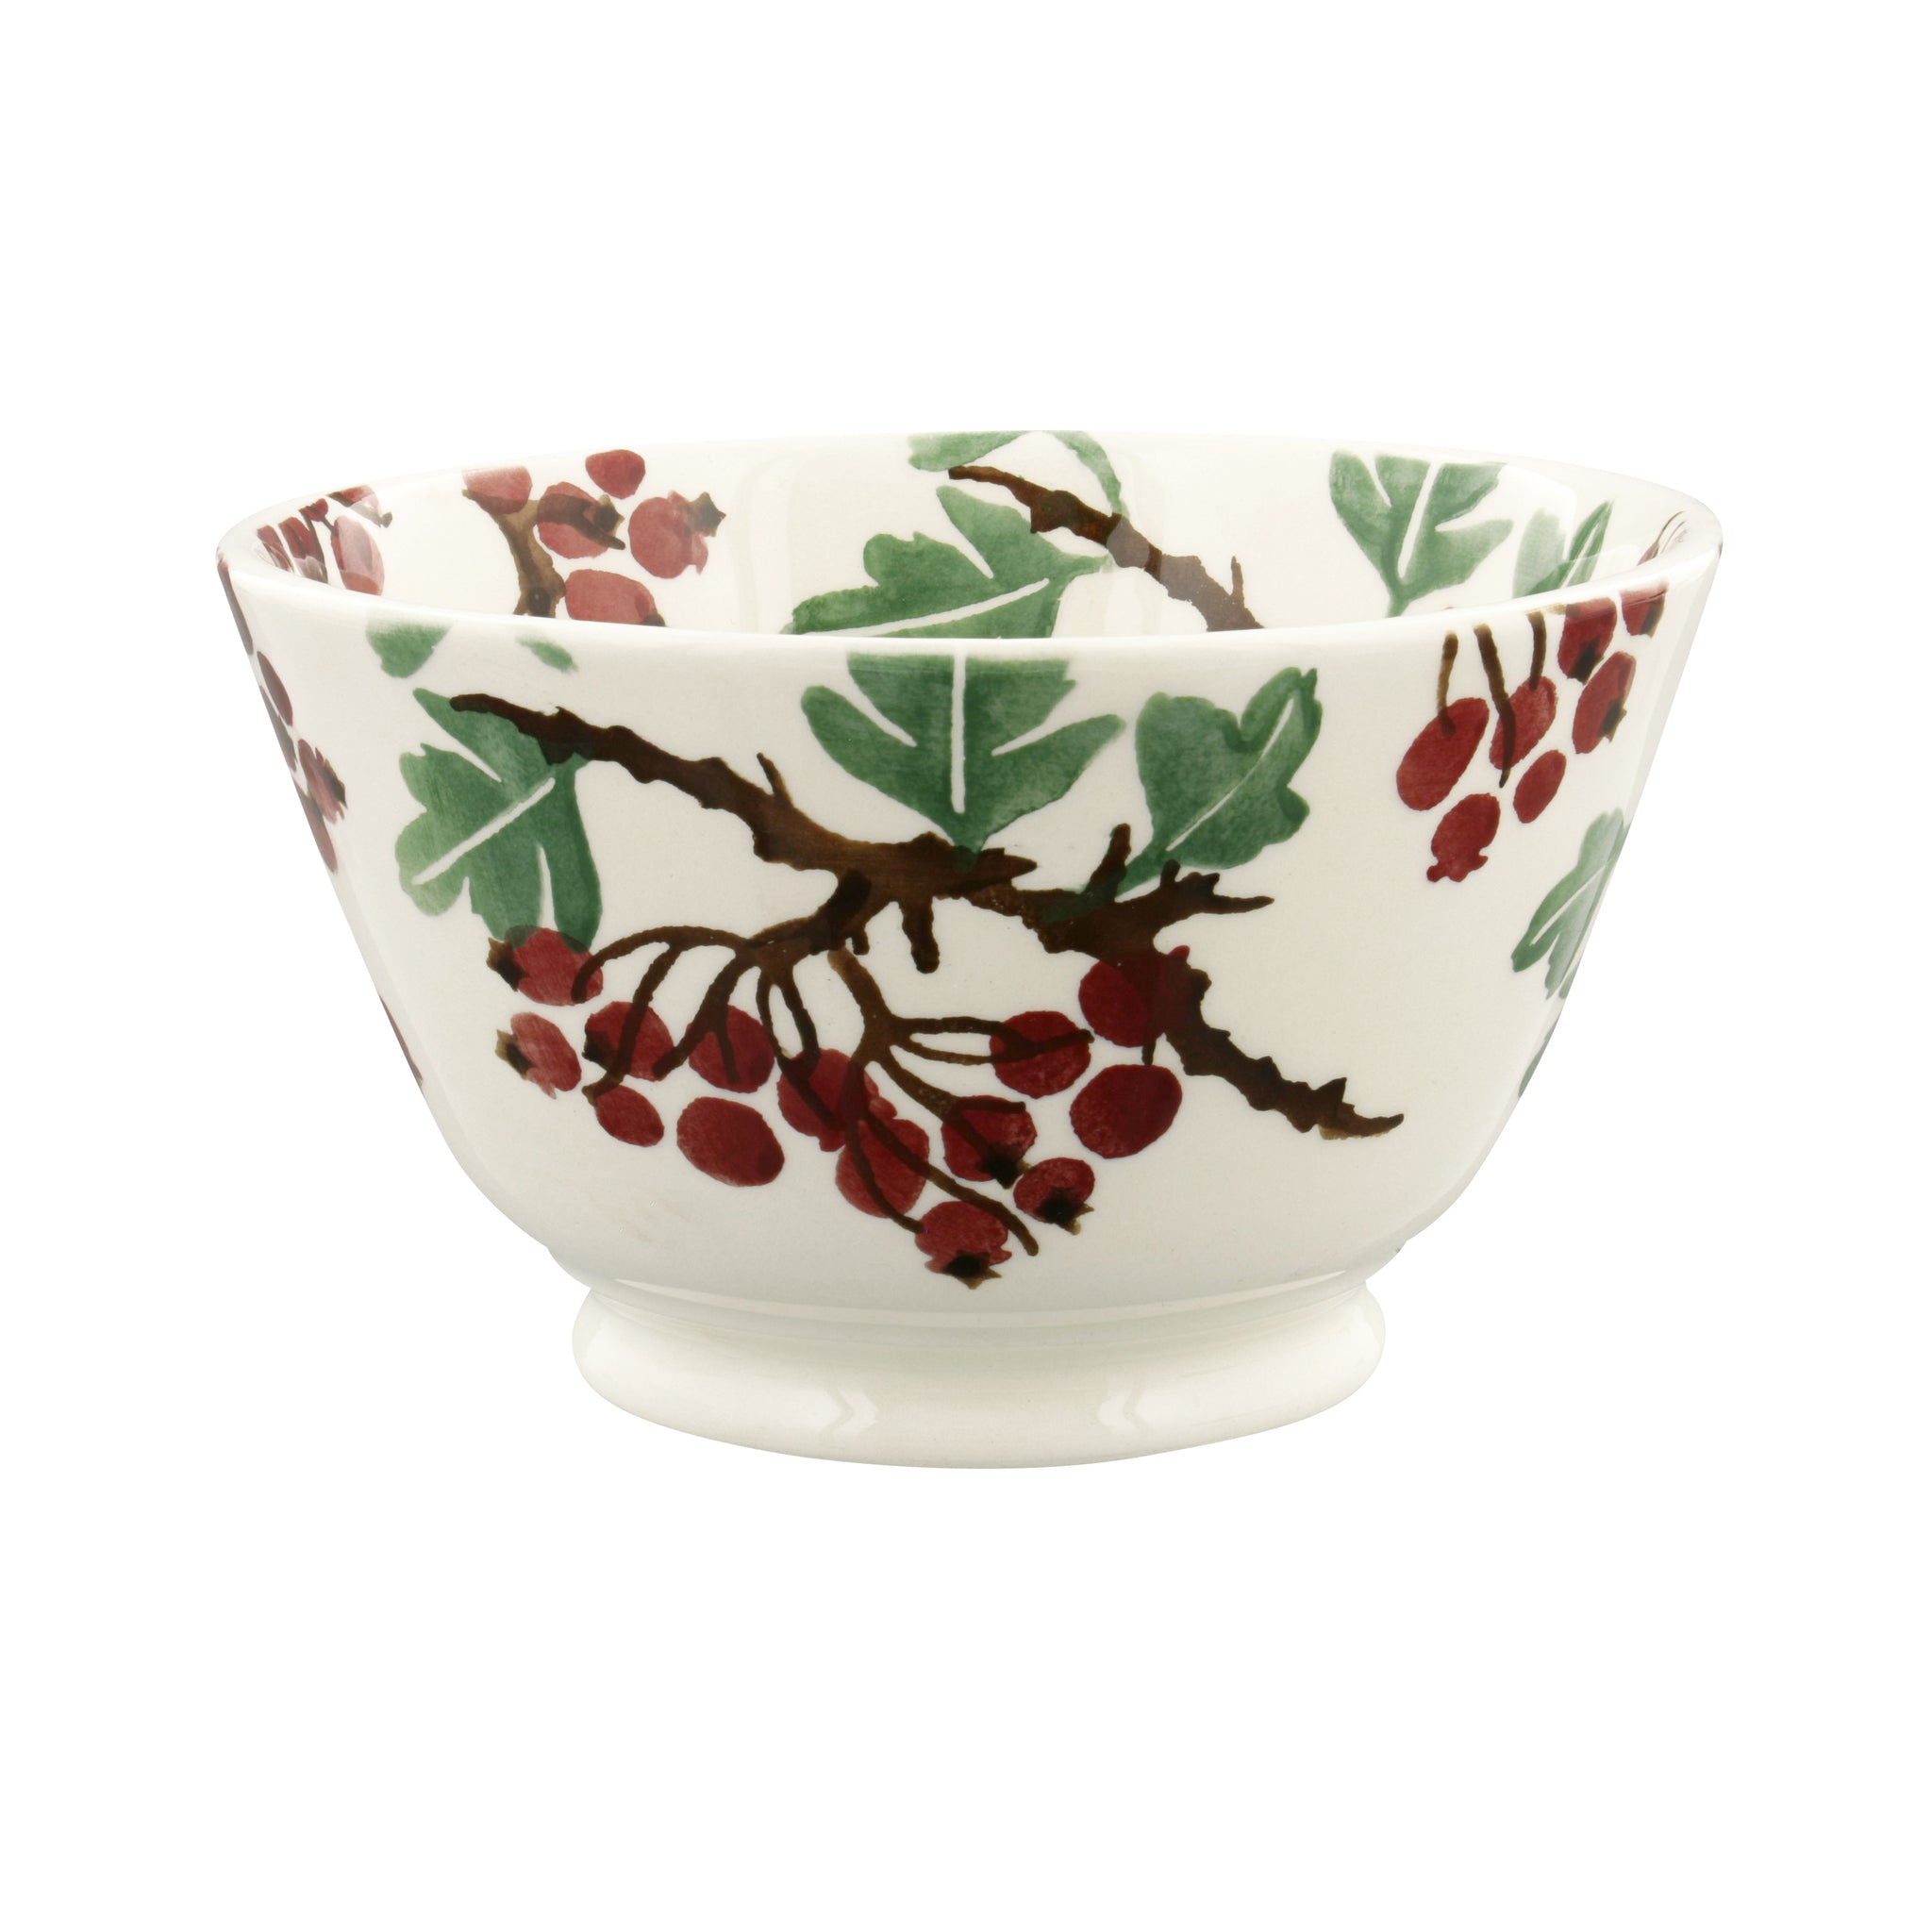 Hawthorn Berries Small Old Bowl